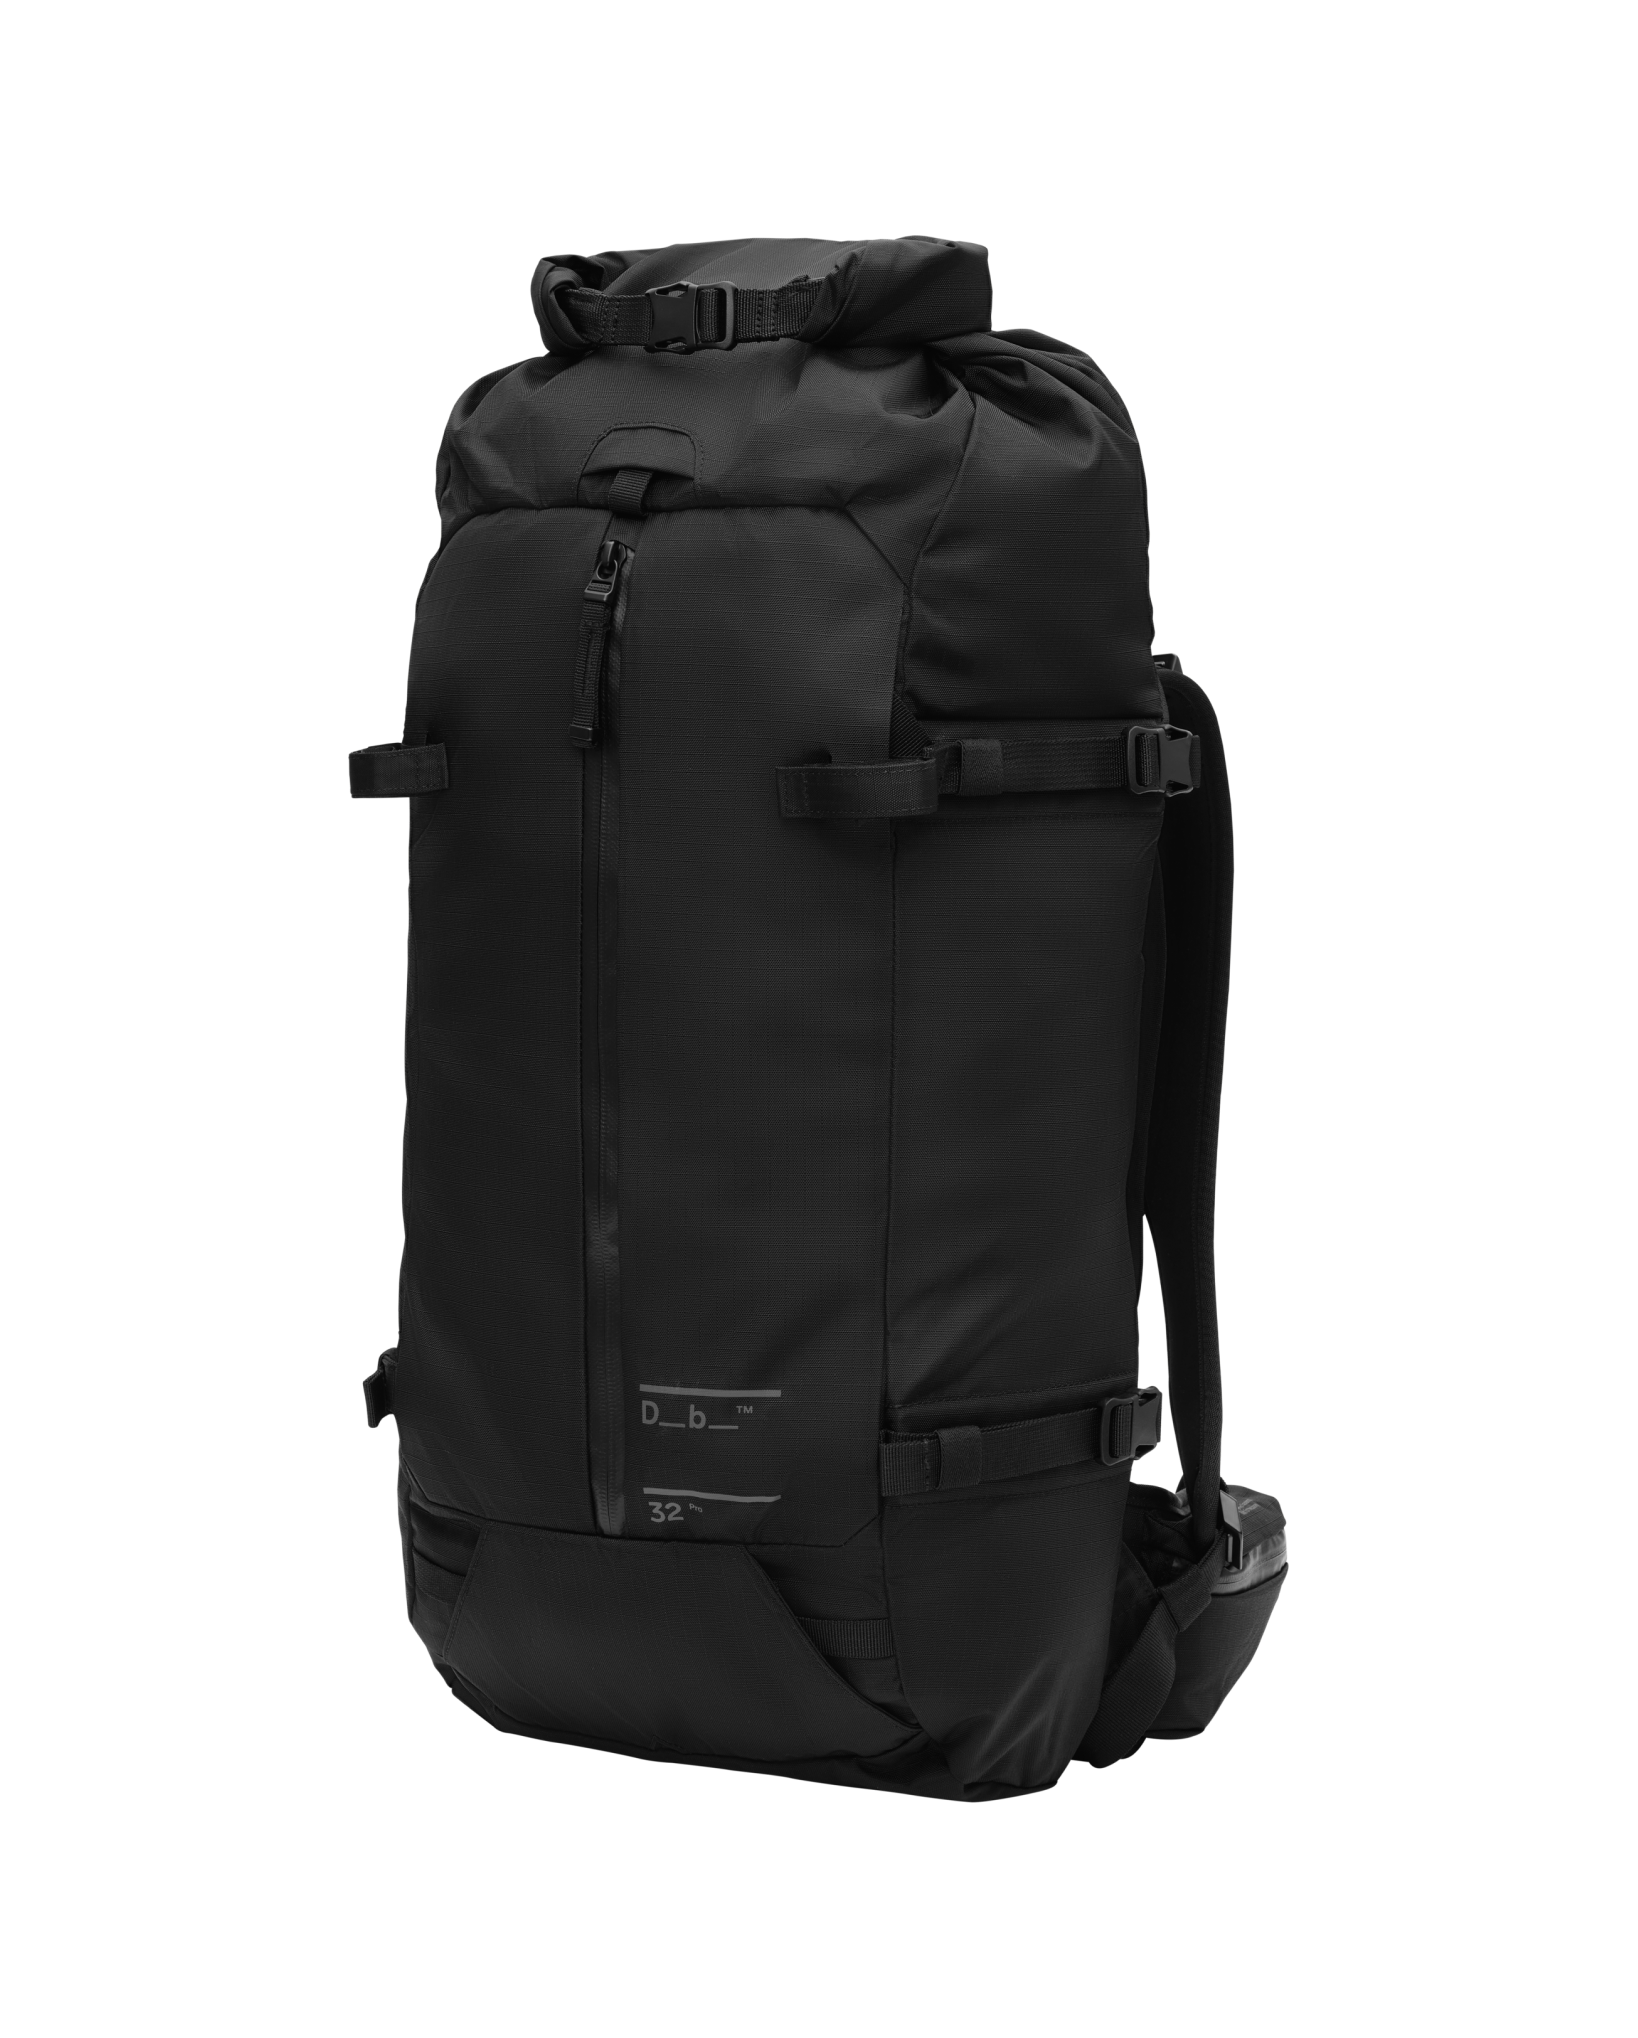 Snow Pro Backpack 32L Black Out - Black Out